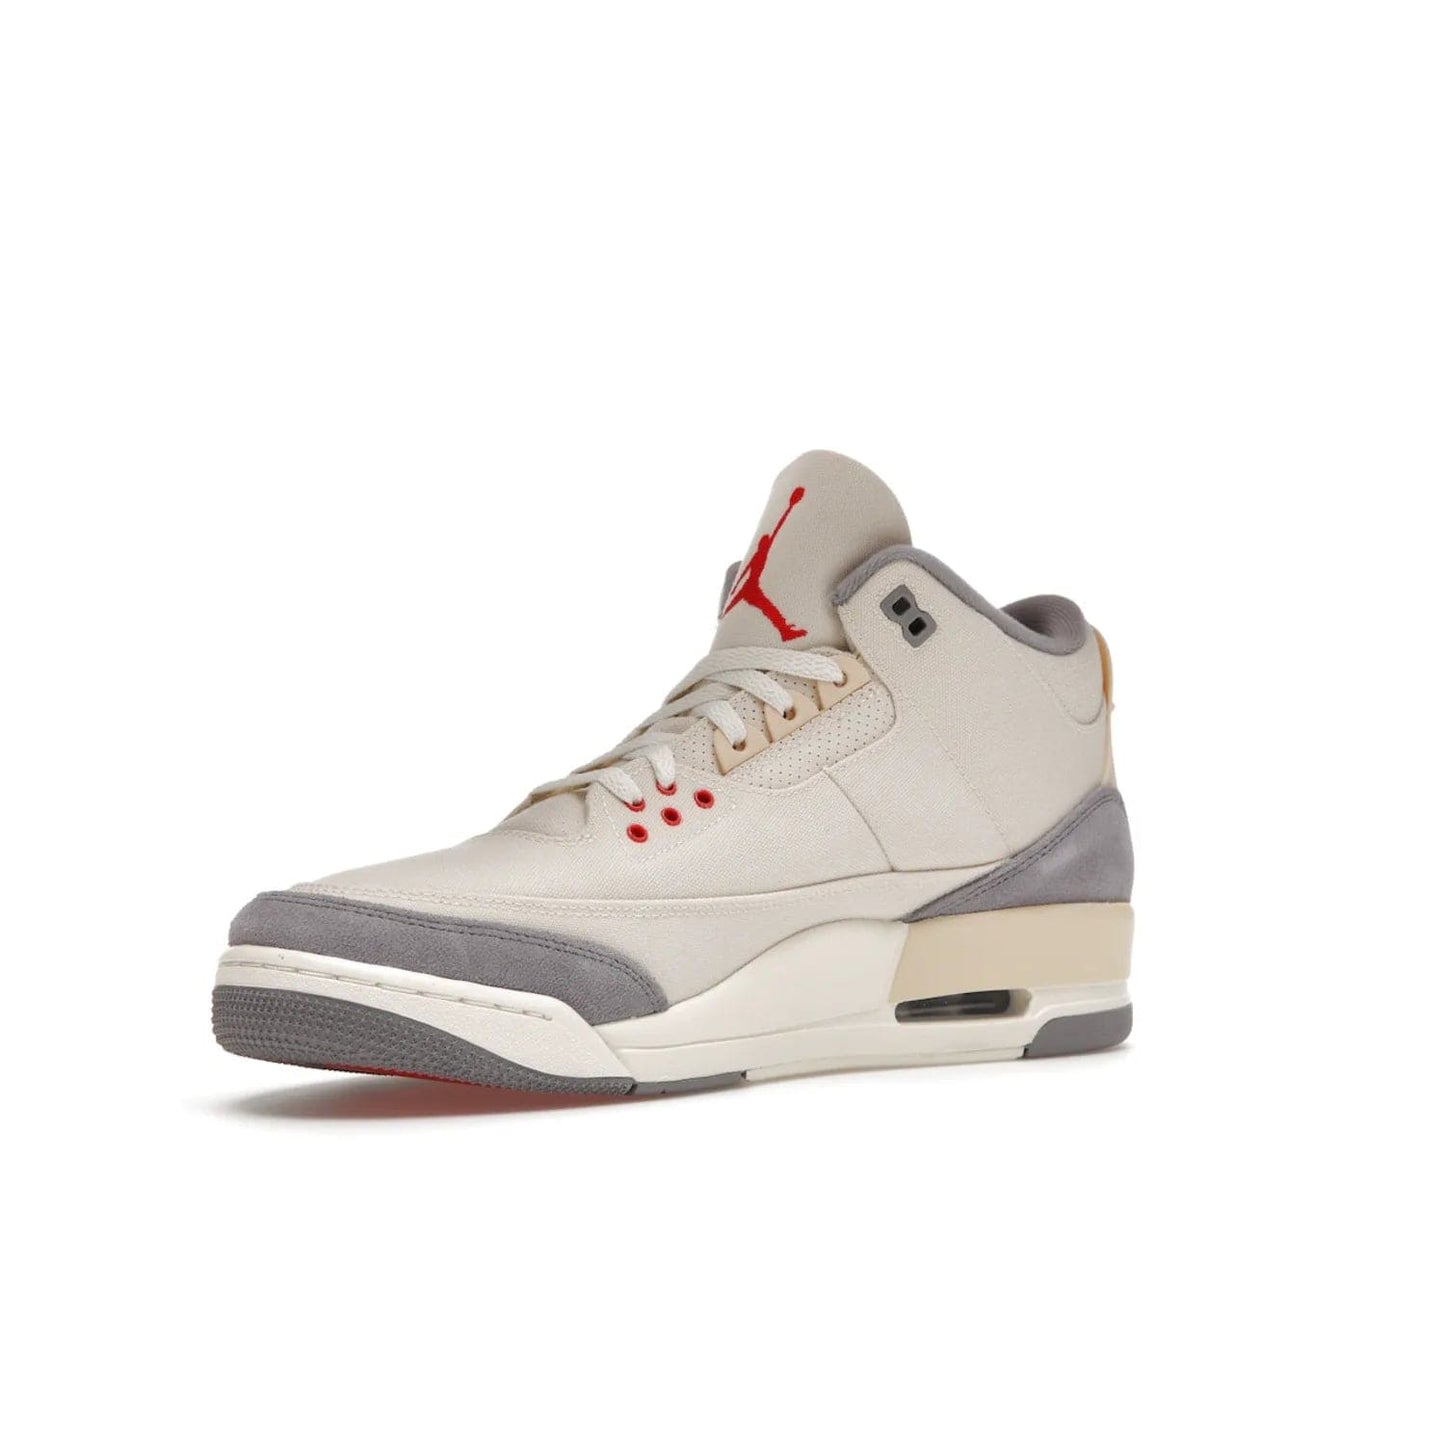 Jordan 3 Retro Muslin - Image 15 - Only at www.BallersClubKickz.com - Eye-catching Air Jordan 3 Retro Muslin in a neutral palette of grey, cream, and red. Featuring canvas upper, suede overlays and white/grey Air Max sole. Available in March 2022.